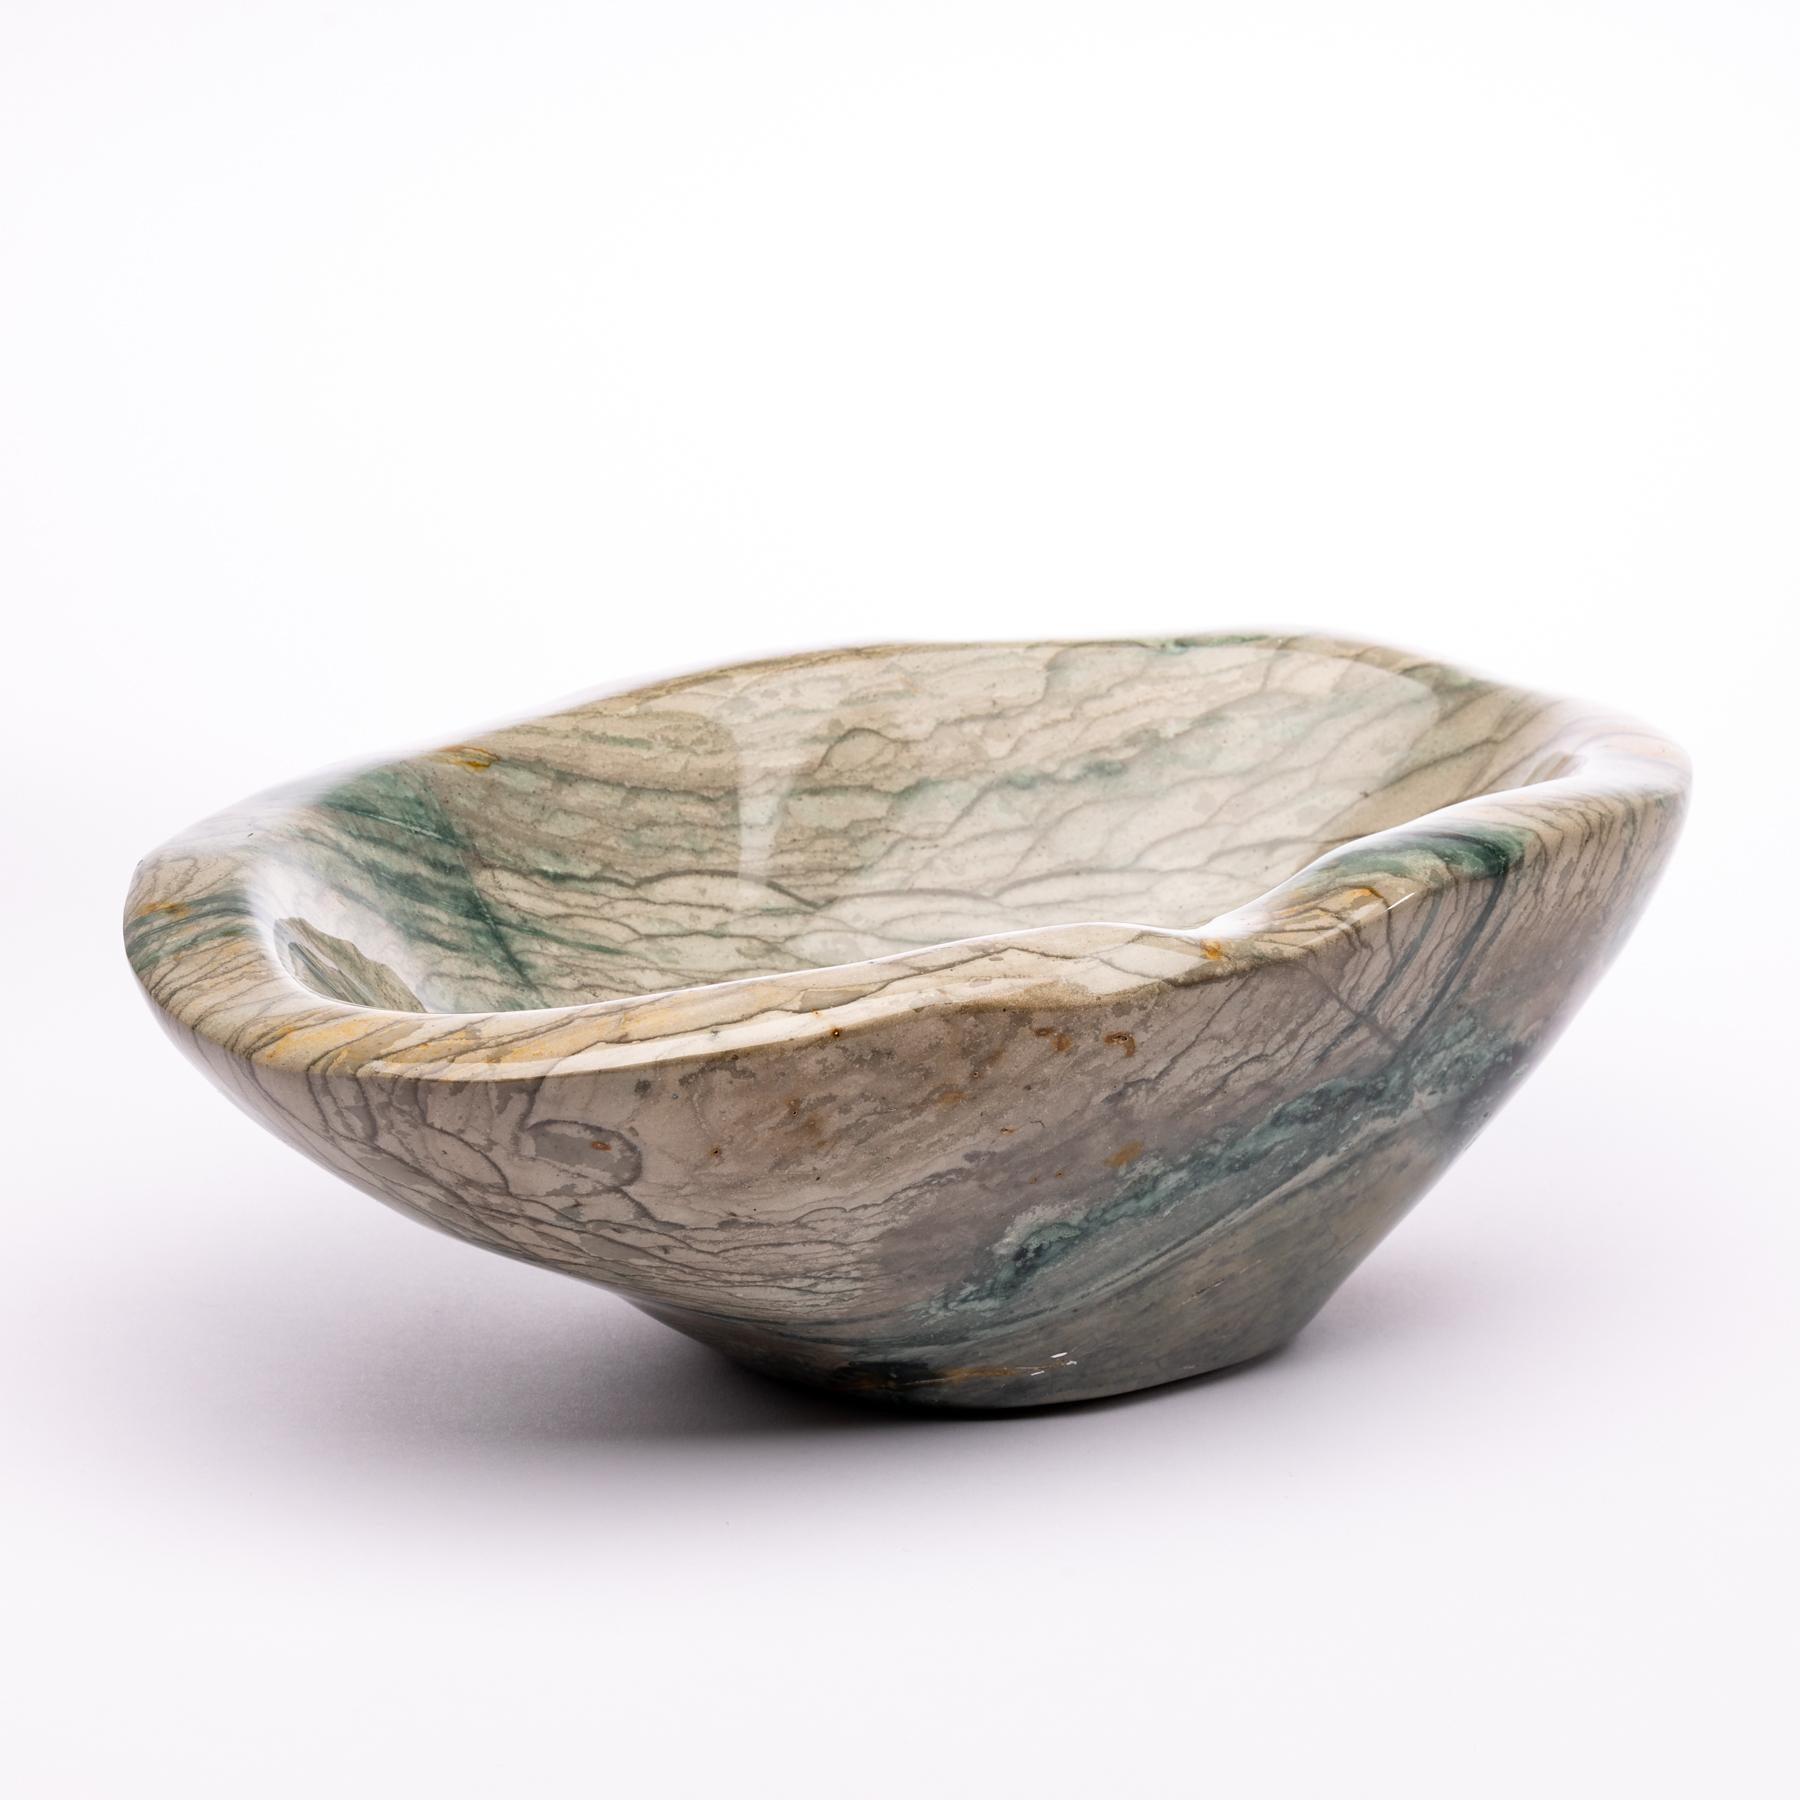 Organic Modern Large Green and White Shade Jasper Handcrafted Bowl from Madagascar